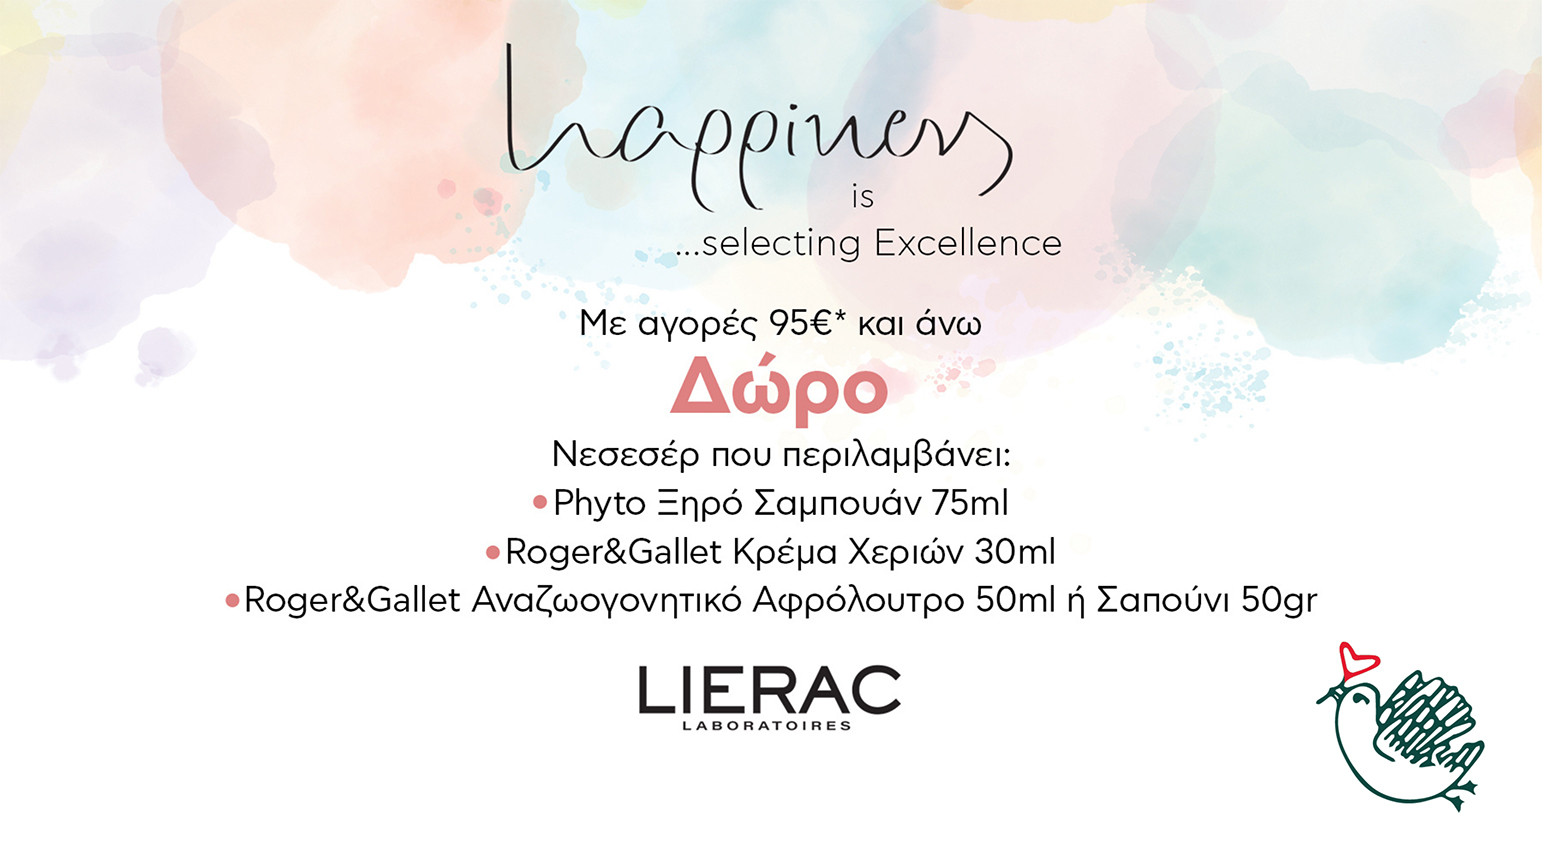 HAPPINESS LIERAC